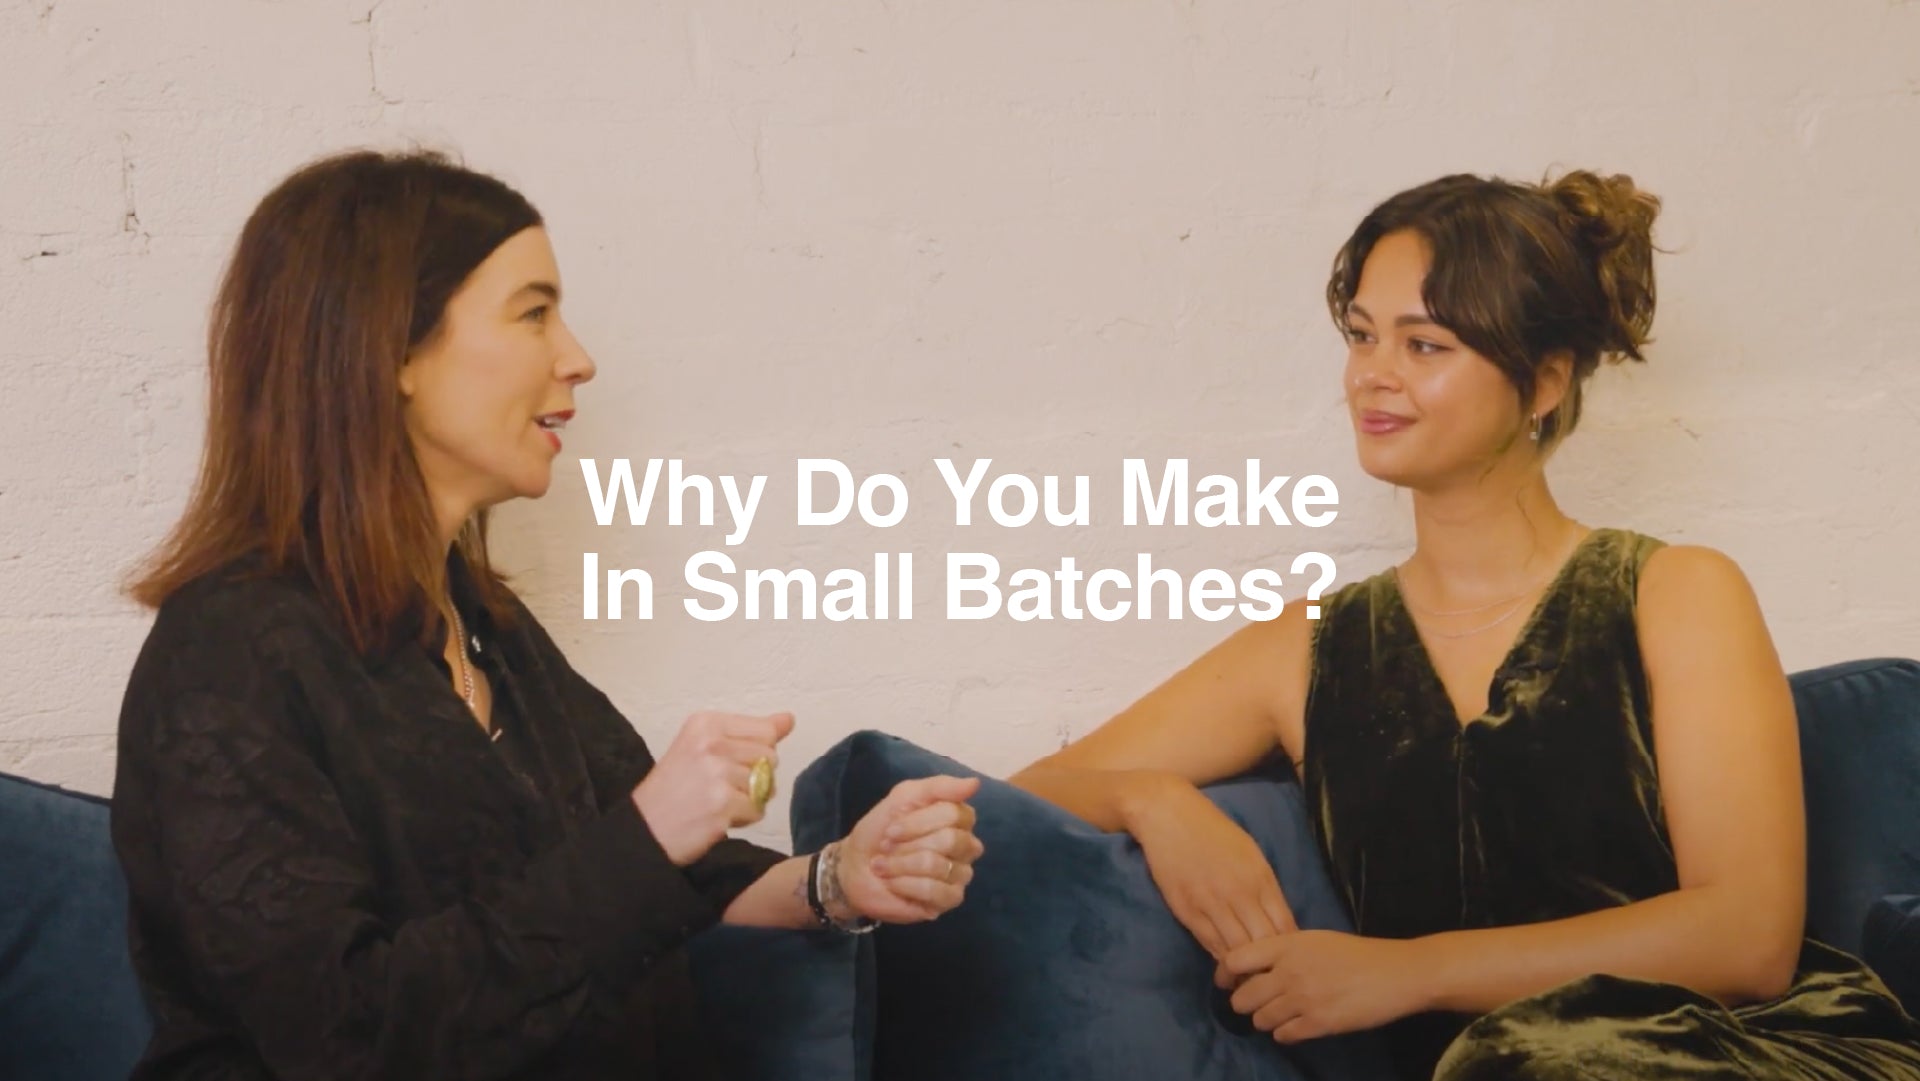 Why do we make shoes in small batches?